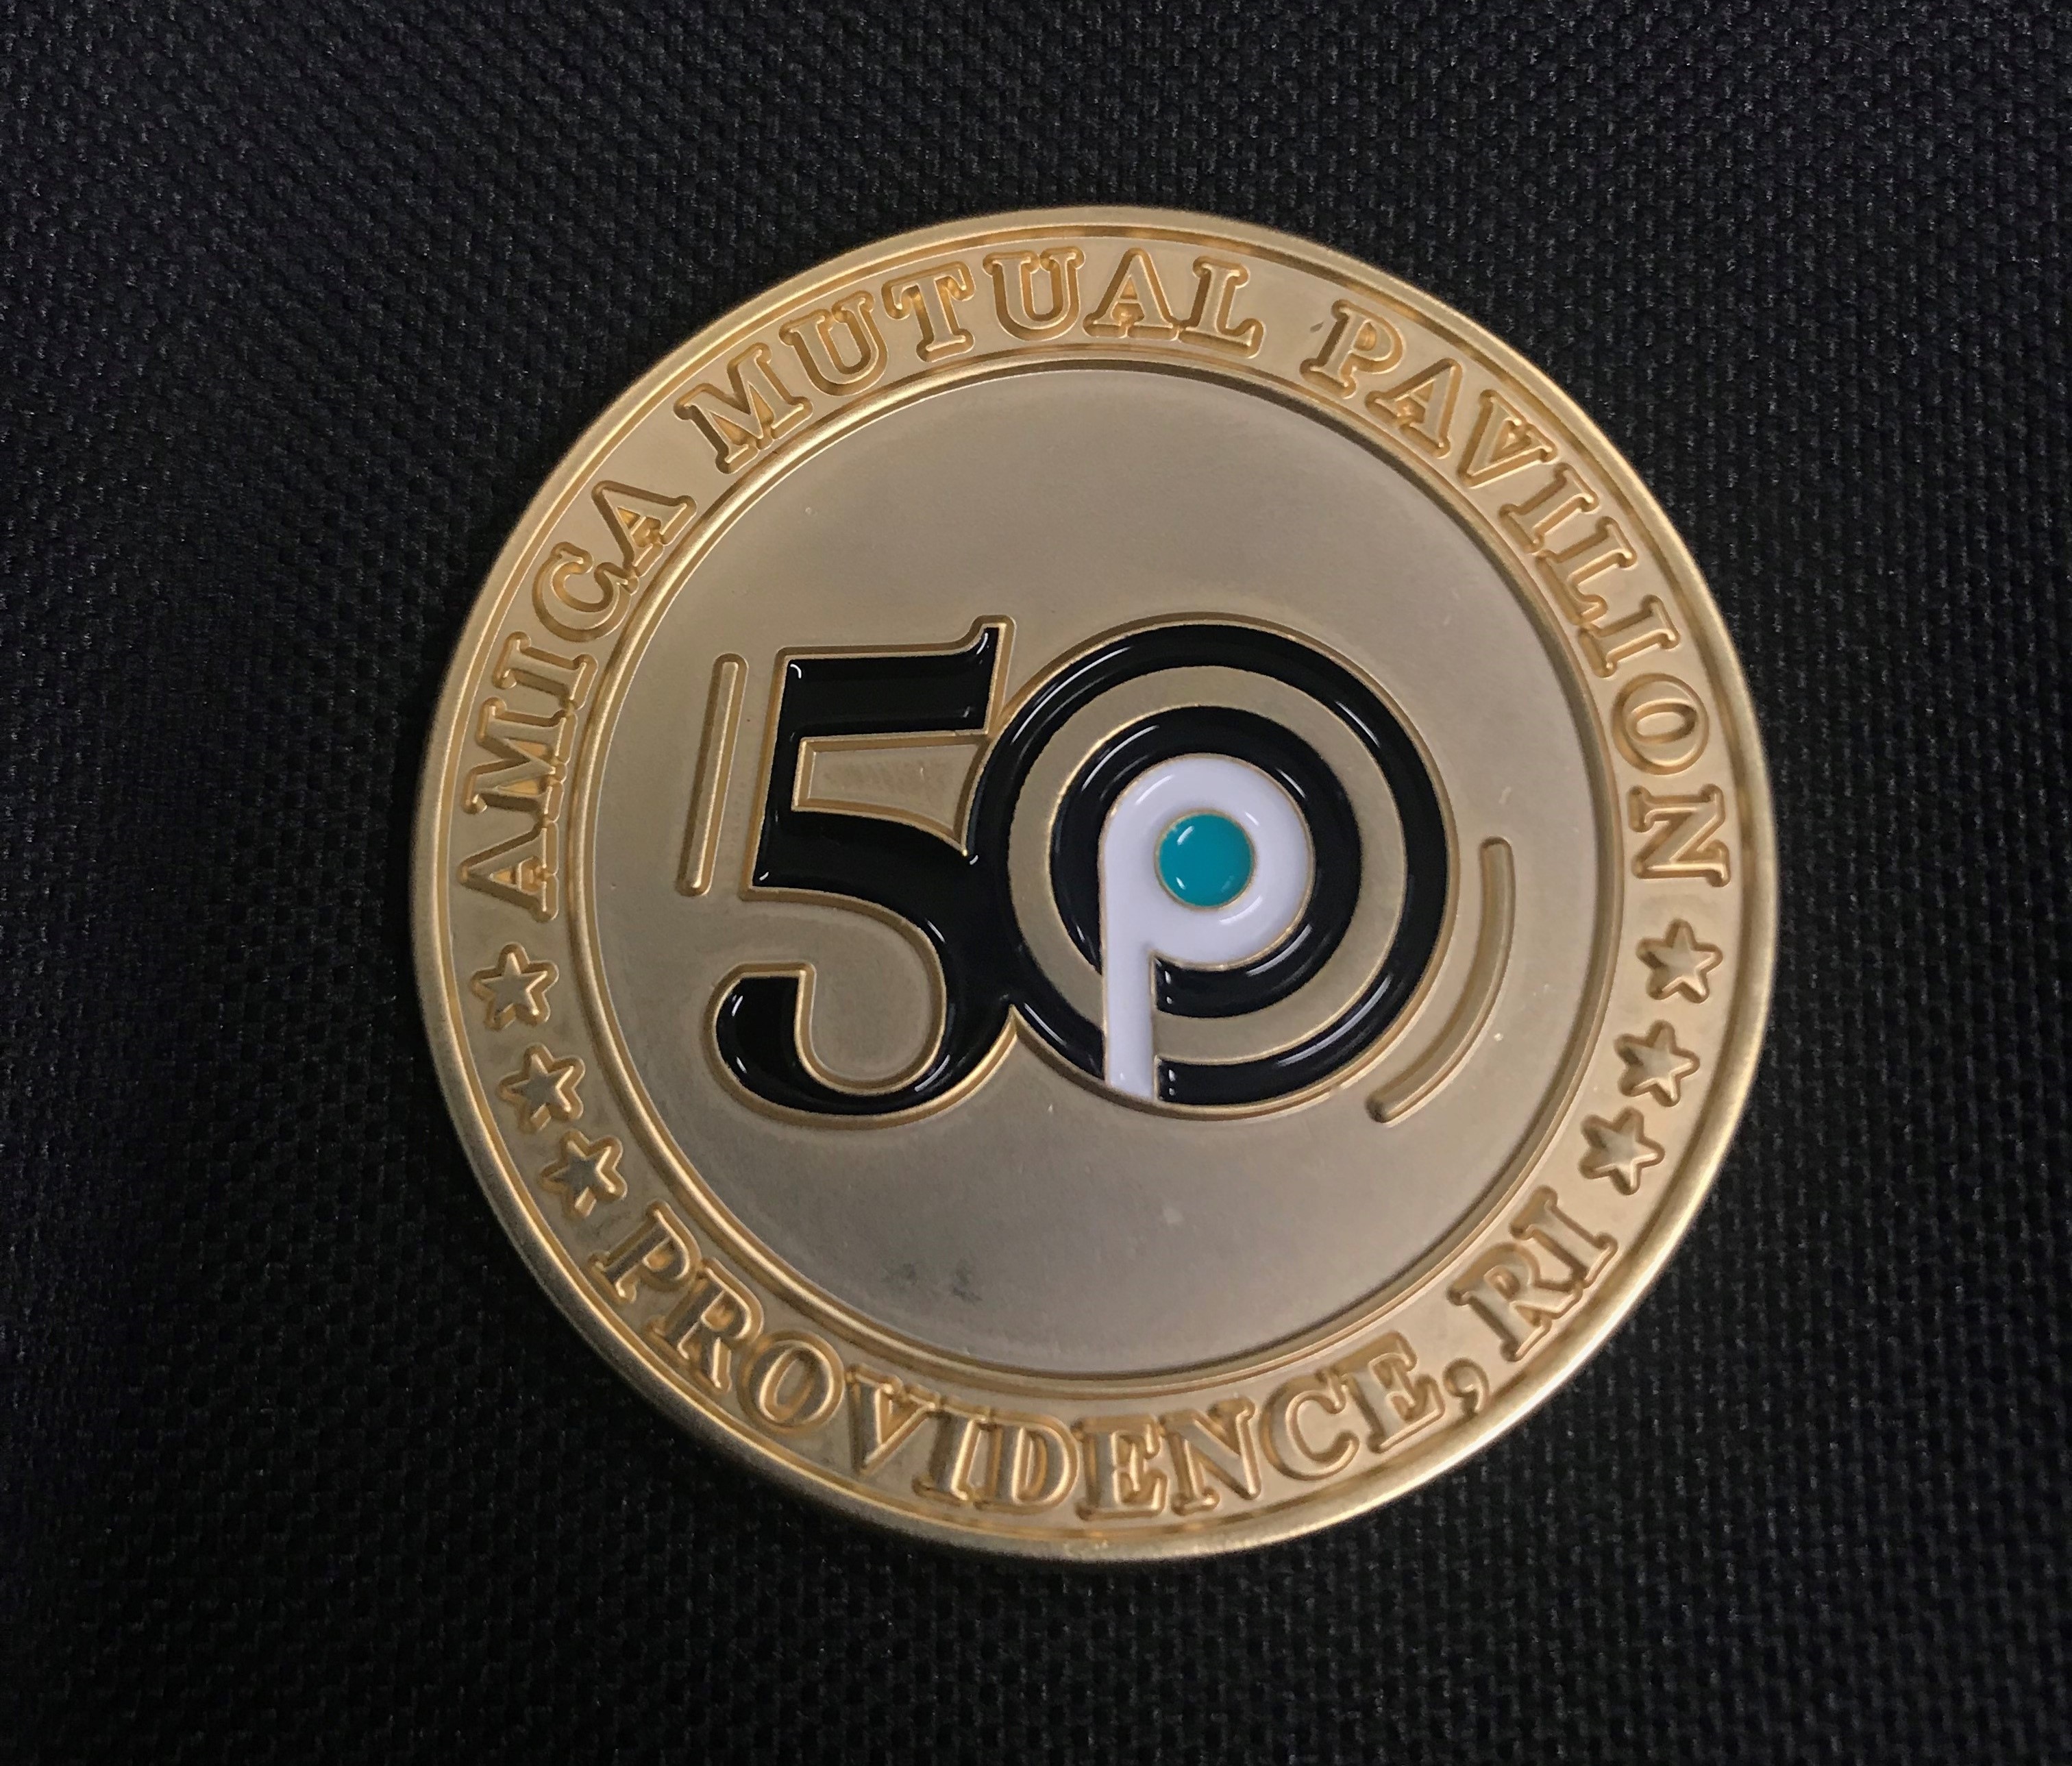 A COMMEMORATIVE COIN signifying Amica Mutual Pavilion's 50th anniversary will be utilized for promotional purposes throughout the year. / PBN PHOTO/JAMES BESSETTE